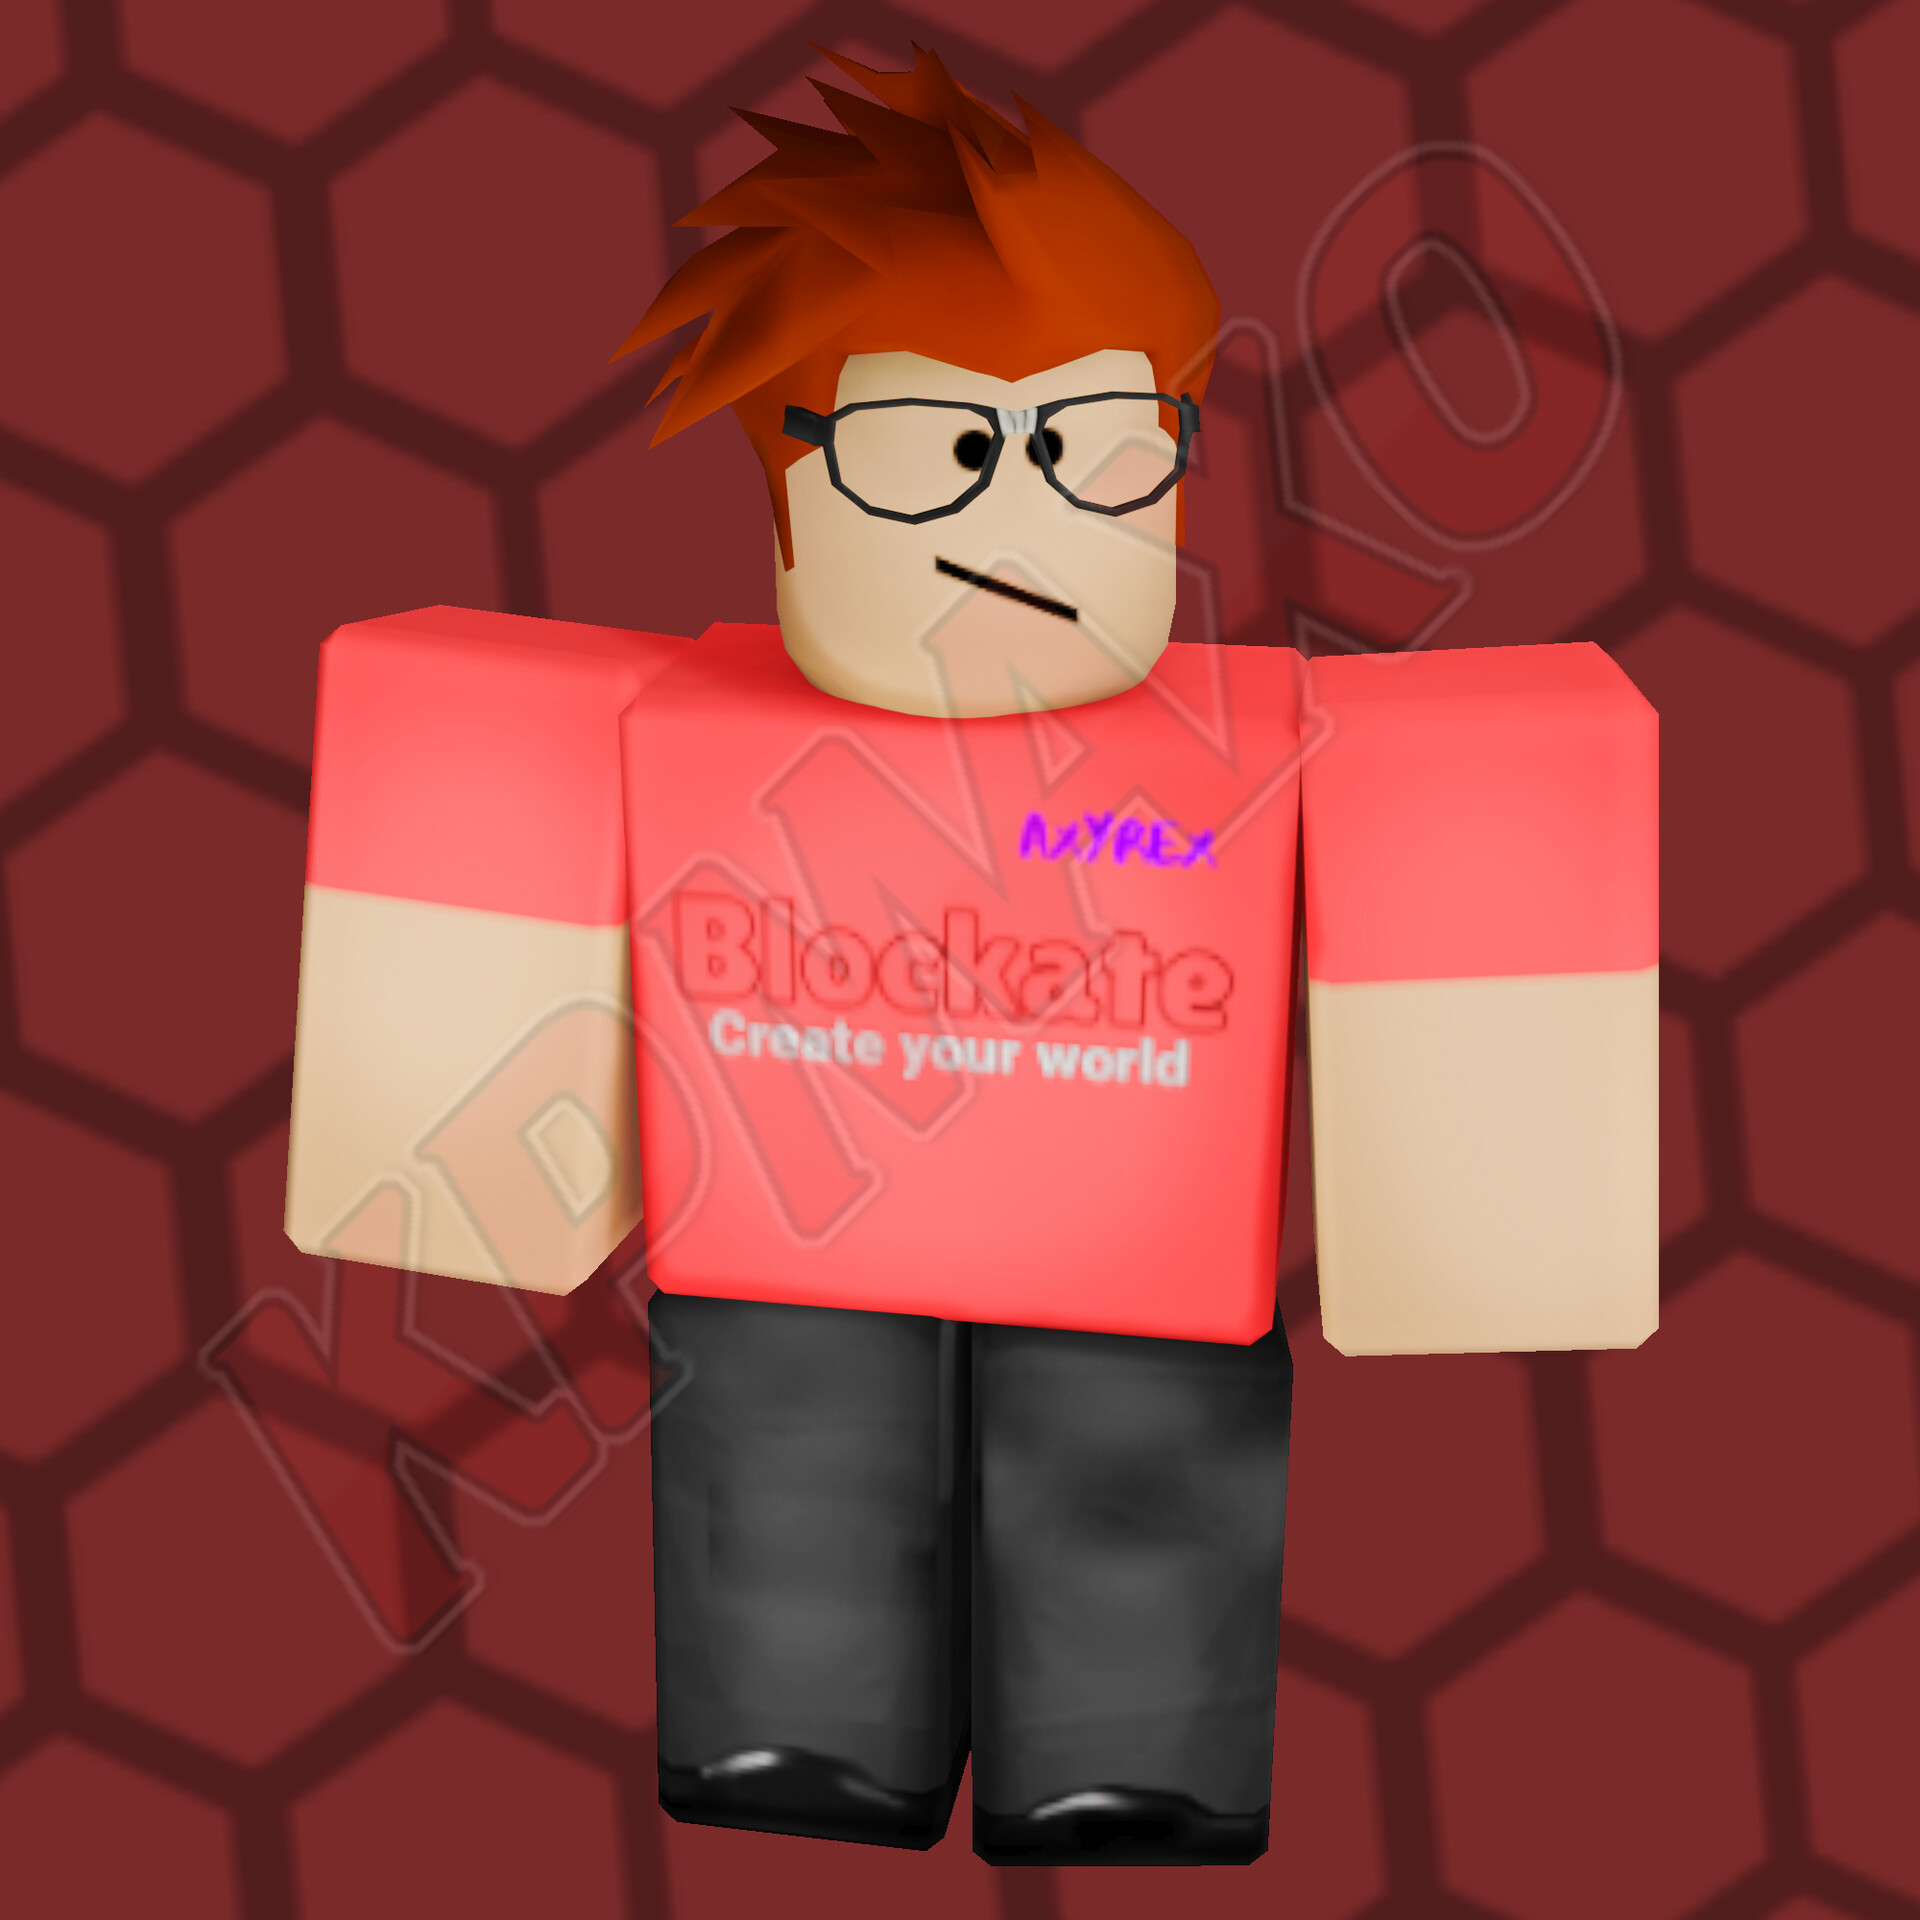 design a detailed gfx of your roblox character